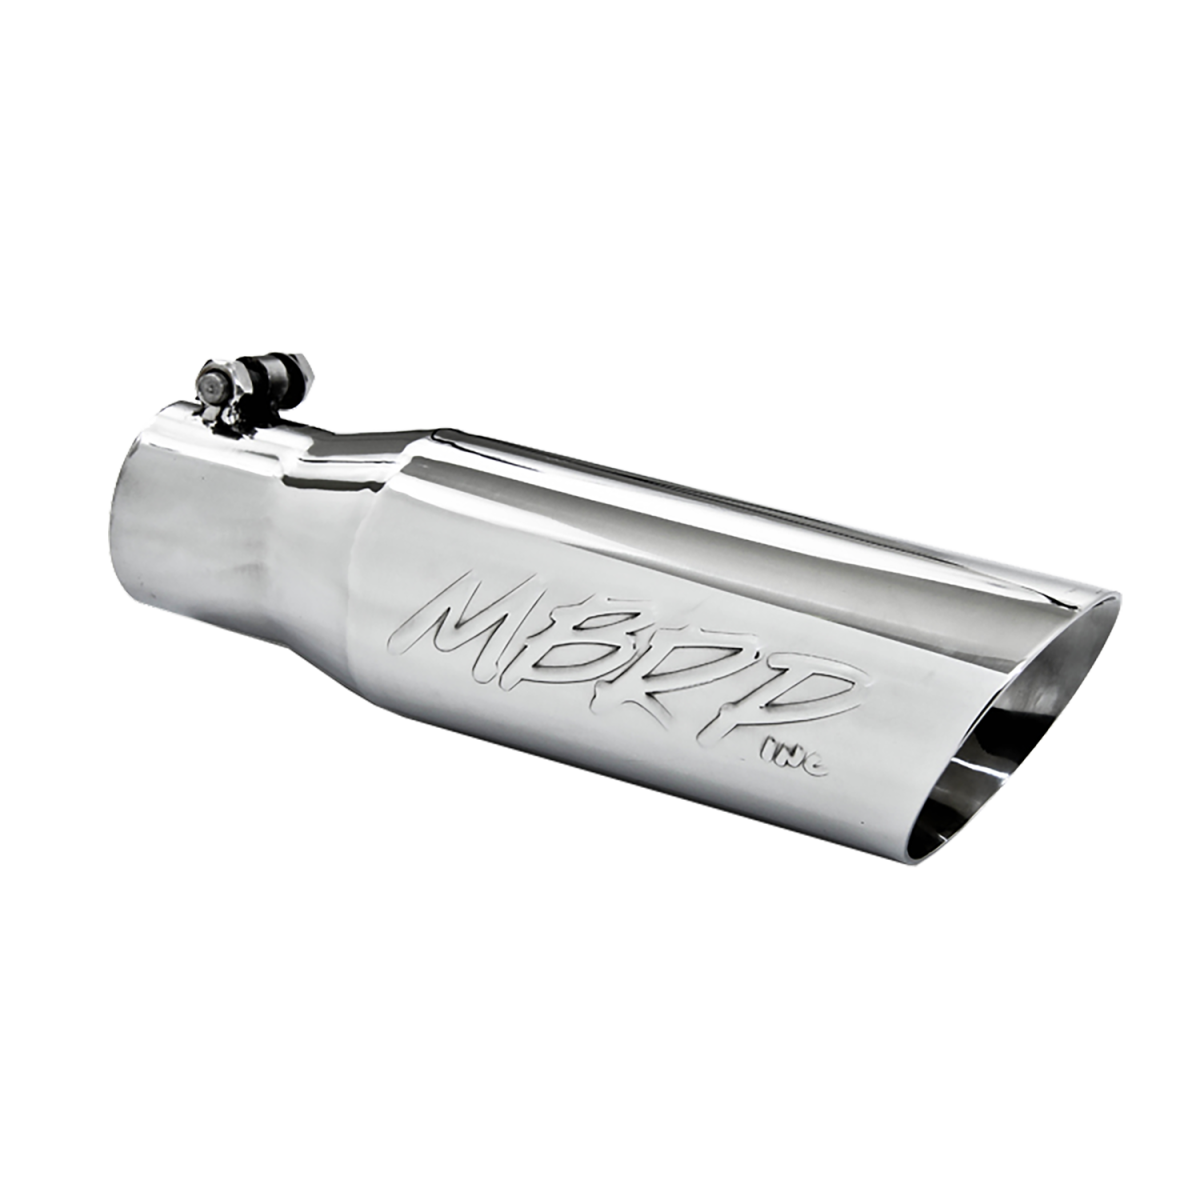 MBRP - MBRP Exhaust Tail Pipe Tip 3 1/2 Inch O.D. Dual Wall Angled 2 1/2 Inch Inlet 12 Inch Length T304 Stainless Steel T5106